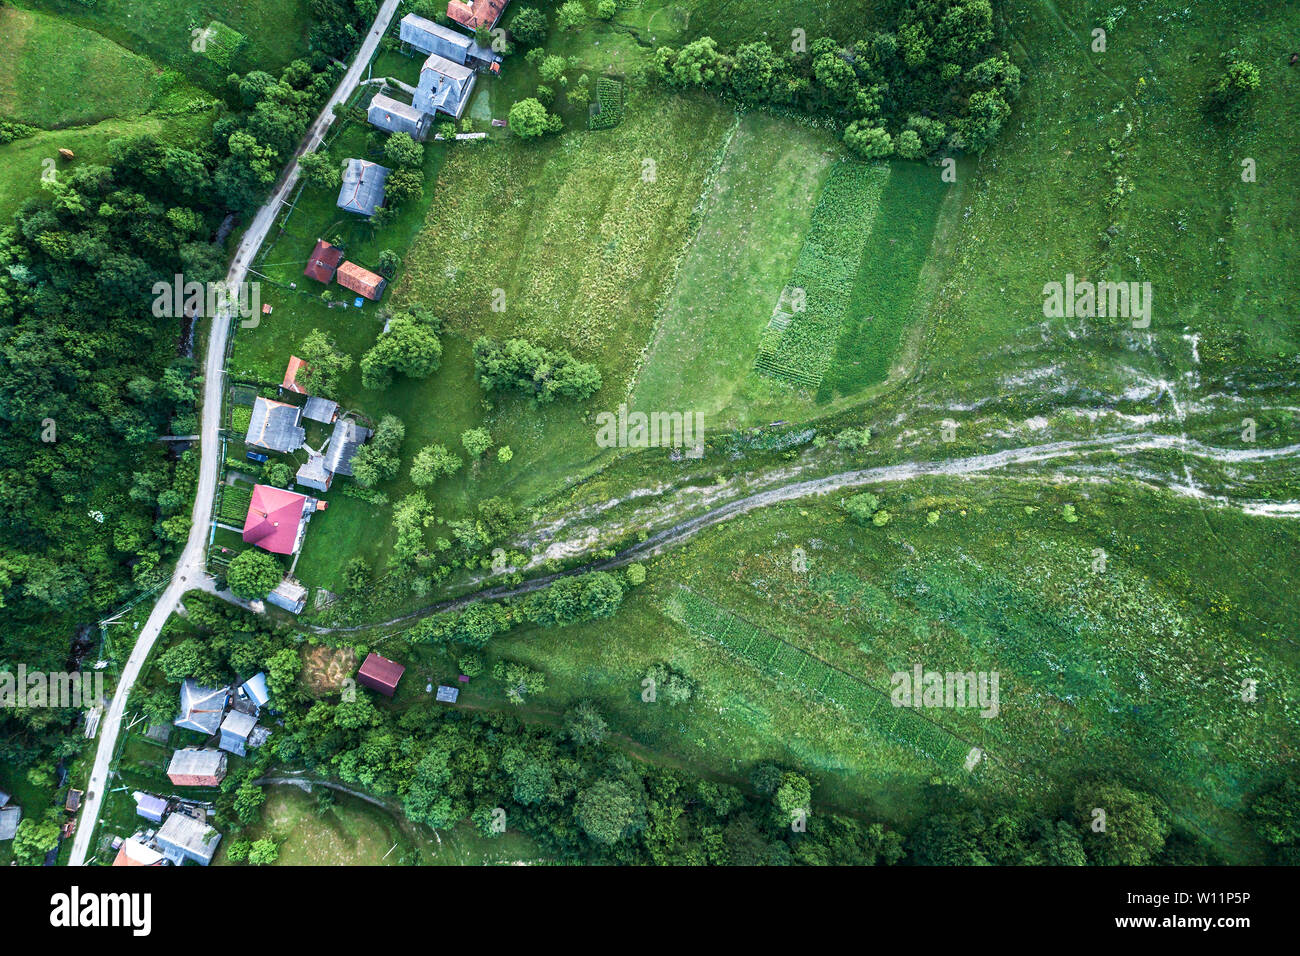 Photo of the countryside from the height of the drone's flight. Stock Photo